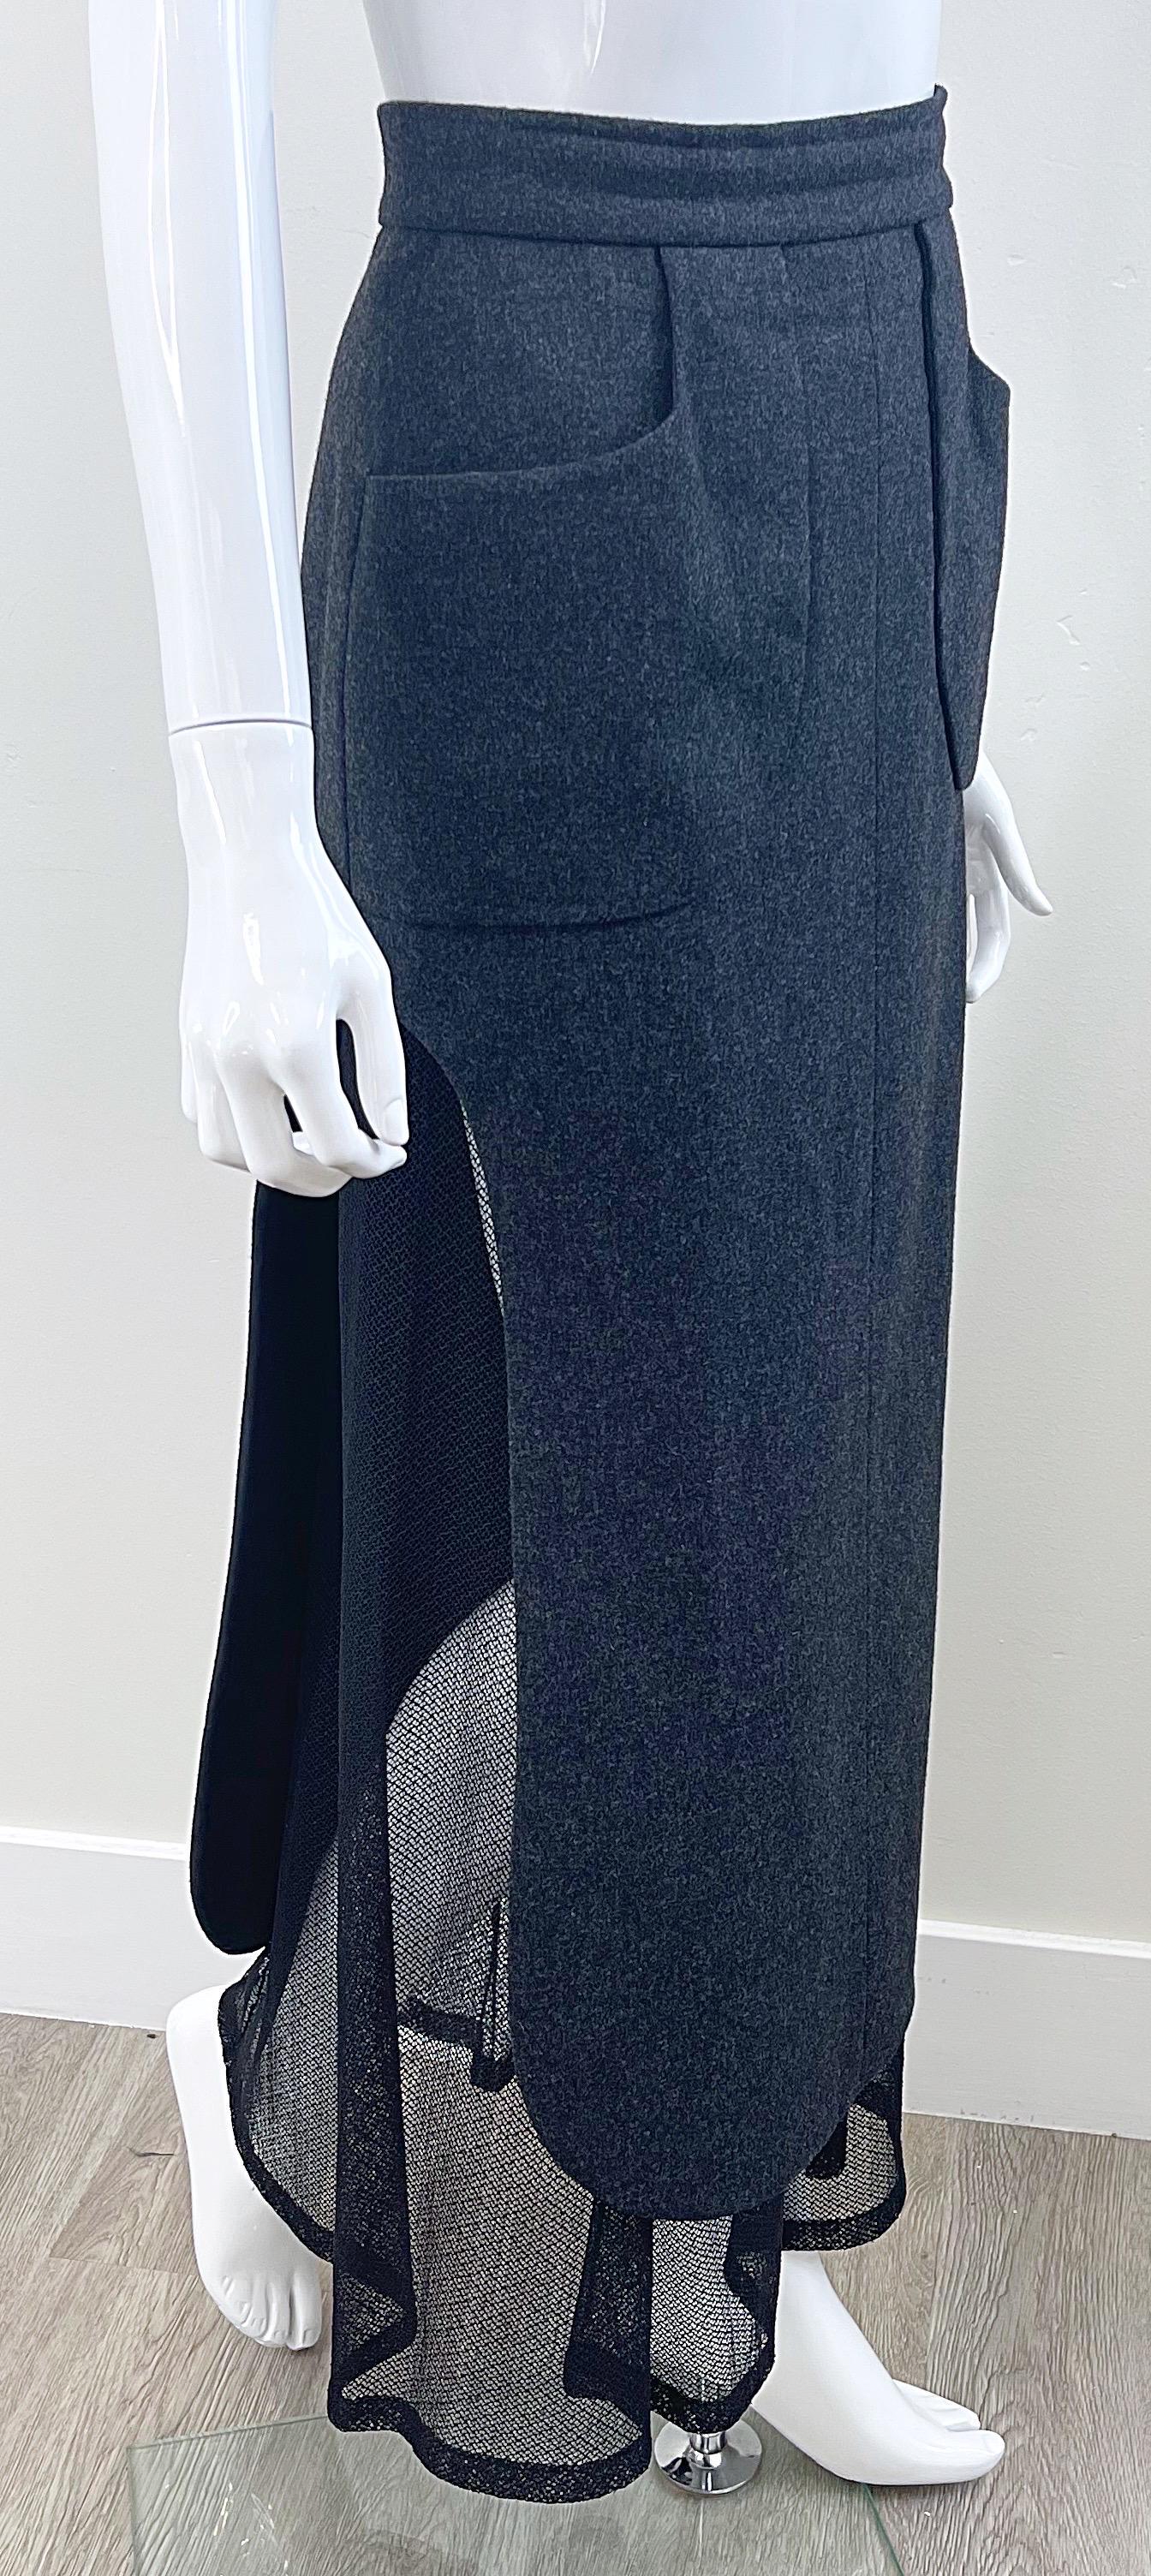 Karl Lagerfeld 1980s Grey Wool + Black Lace Vintage 80s Mini Maxi Skirt For Sale 12